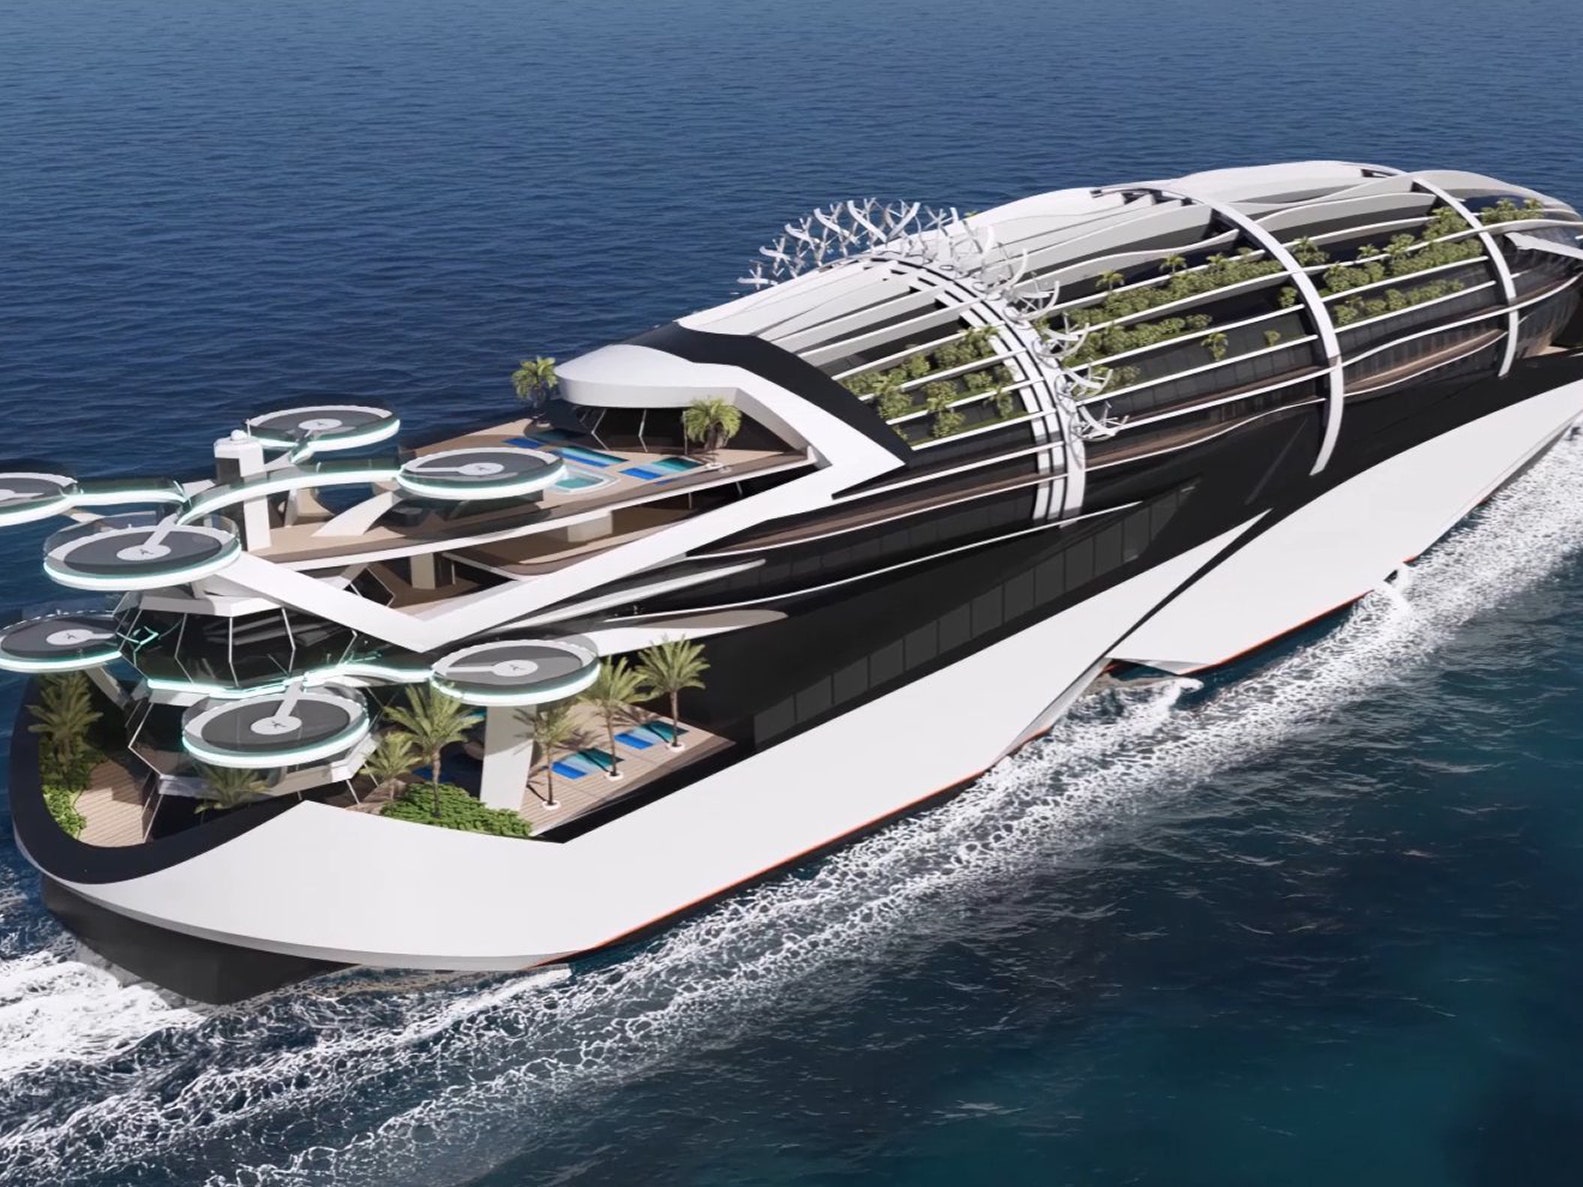 Reverse a futuristic yacht concept from Meyer Group.